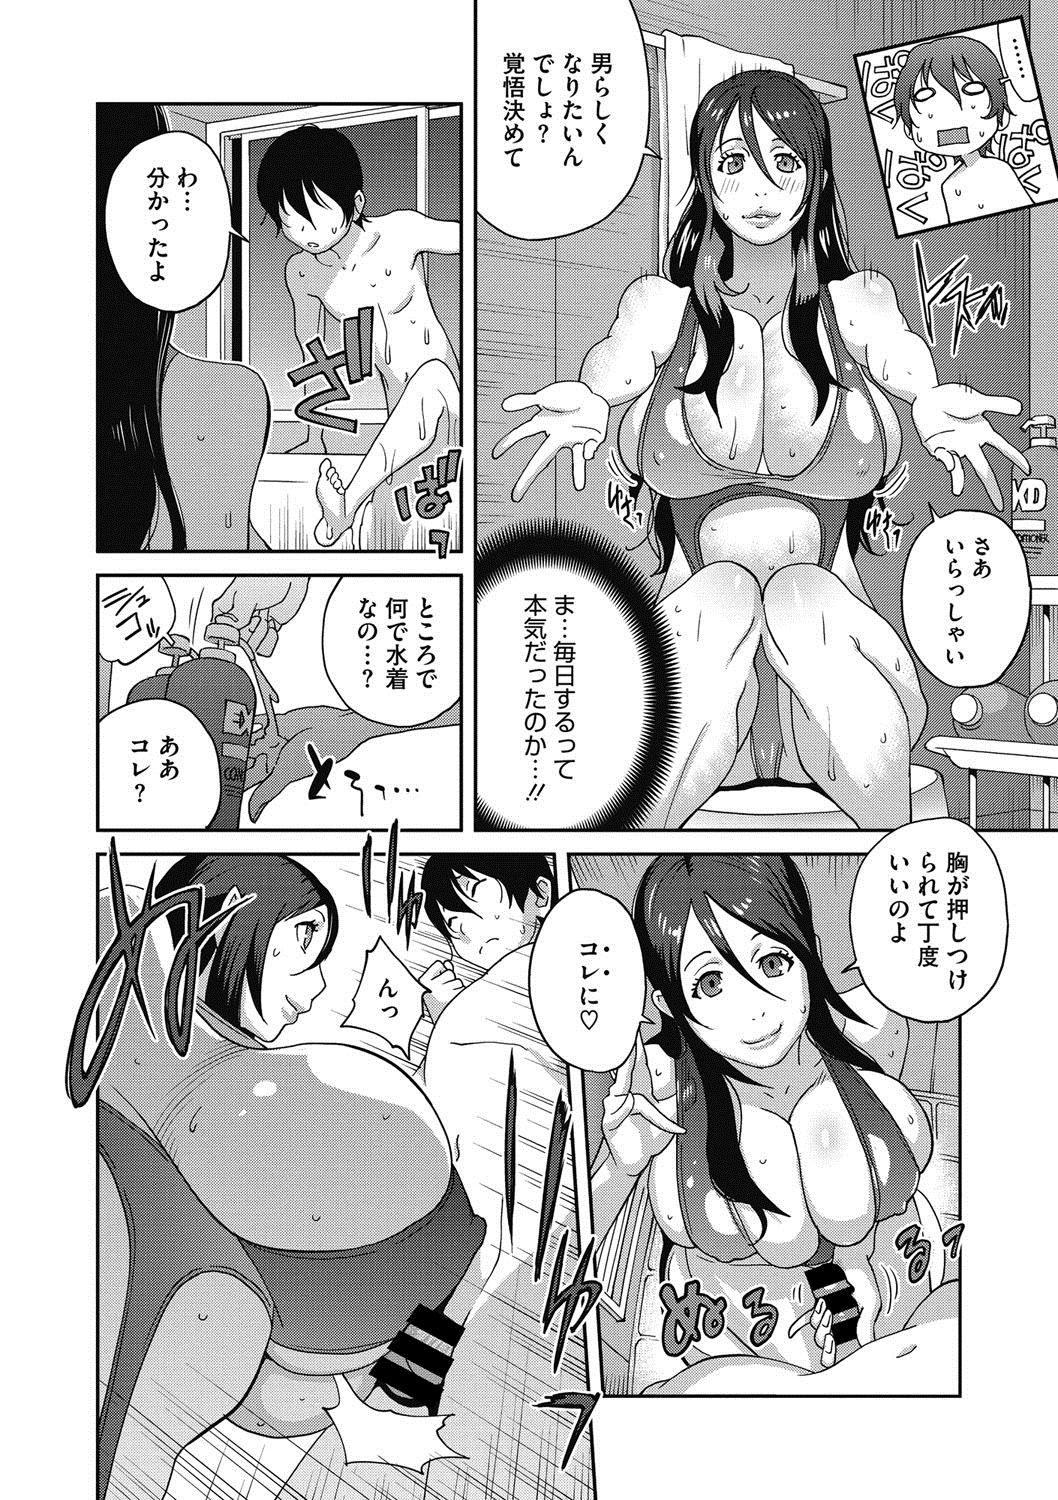 [Kotoyoshi Yumisuke] Haha to Ane to Aoi Ichigo no Fromage - Fromage of mother and an older sister and a blue strawberry Ch. 1-4 25